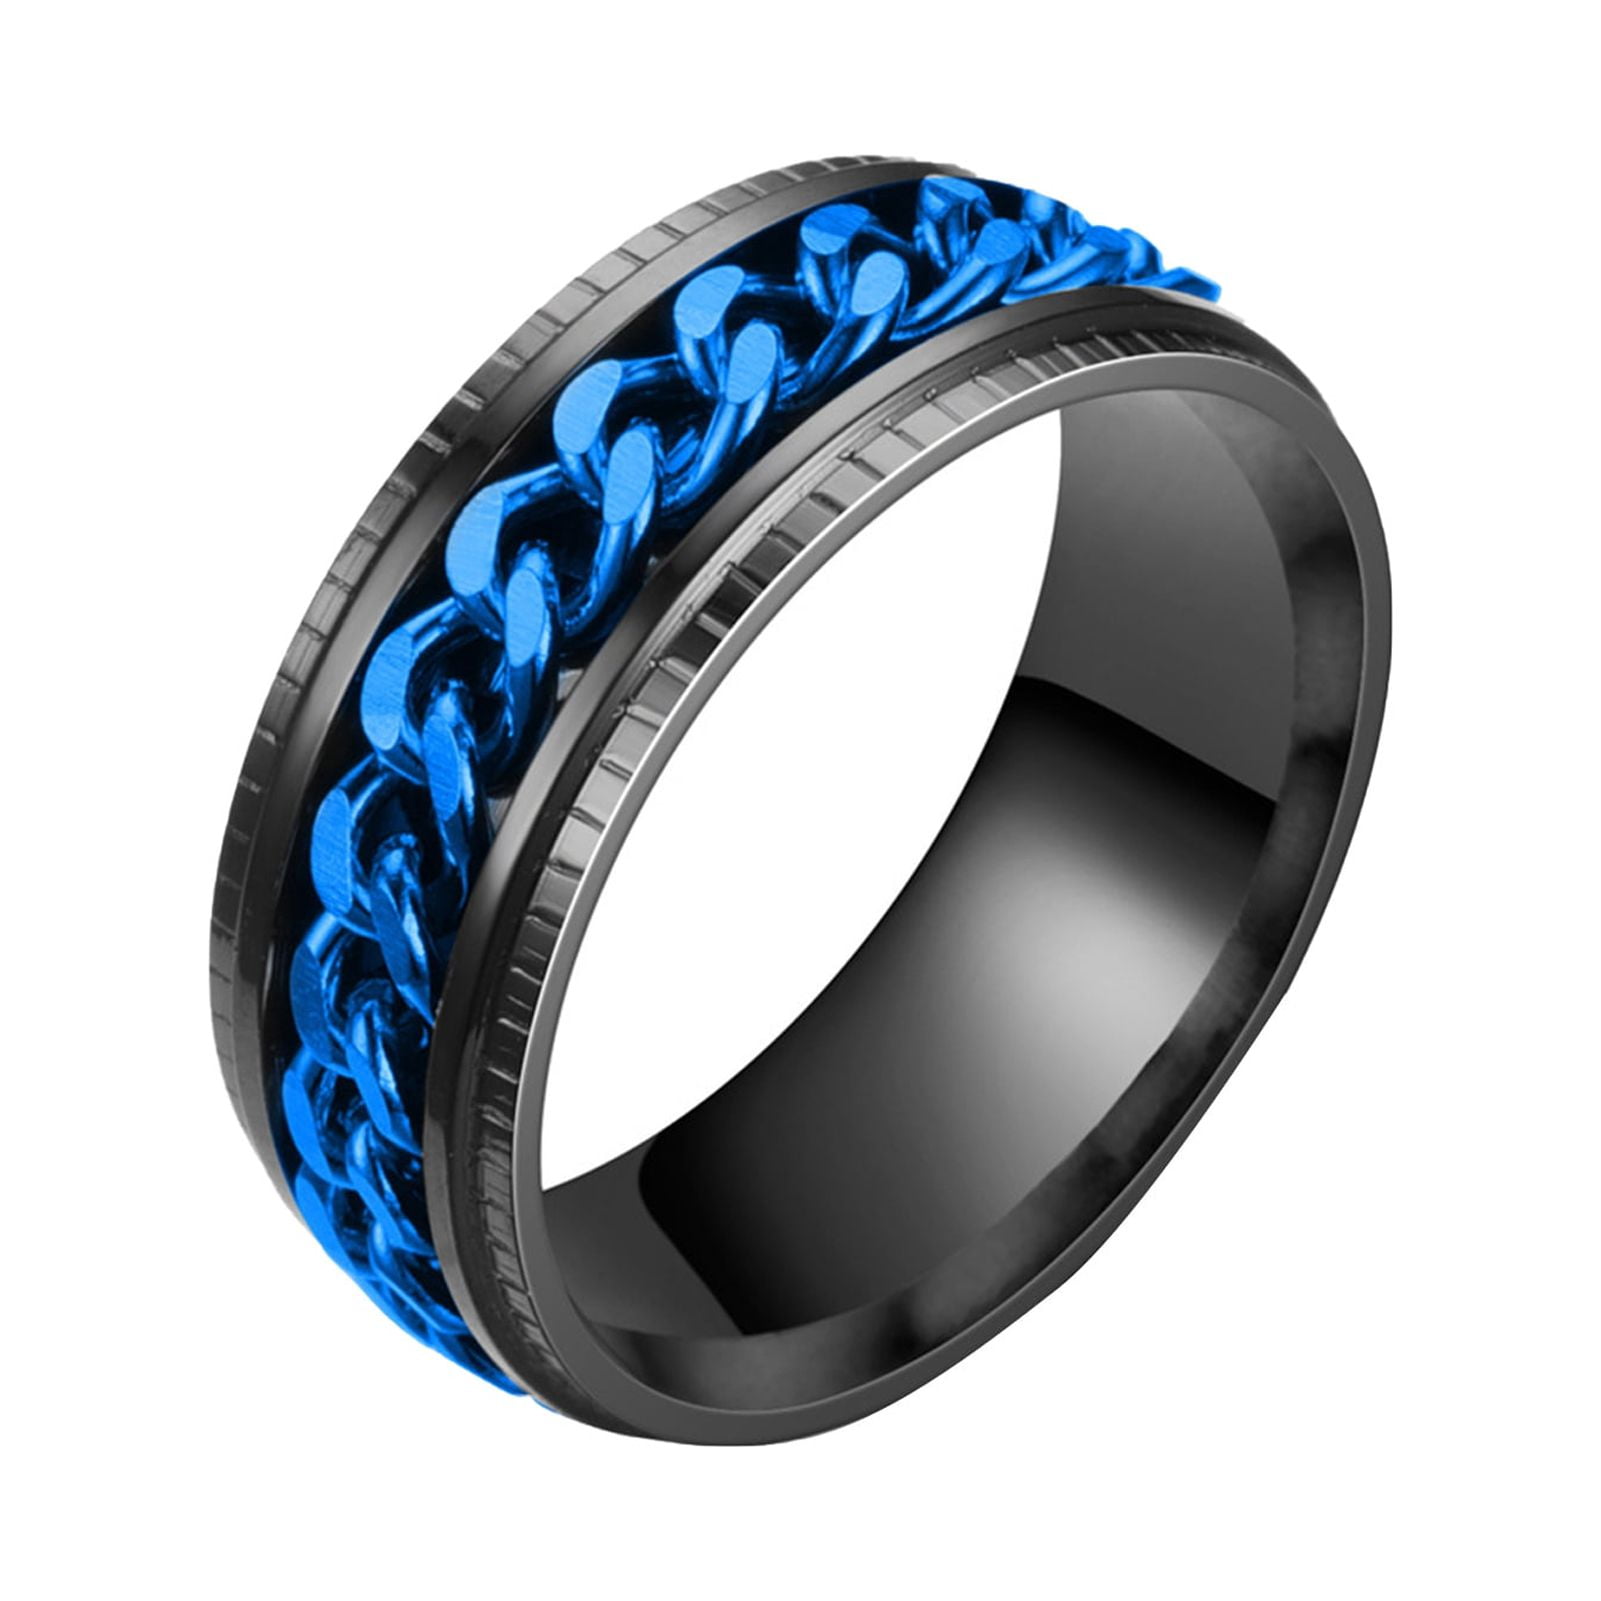 HEVIRGO Boys Ring Simple High Polished Jewelry Rotating Chain Inlaid Finger Ring for Party Alloy Blue dbcc07ff 24d5 4d7b ab20 1bd015b8cc7a.1bff509e3b1cdb7fe2fff1437e094a1d